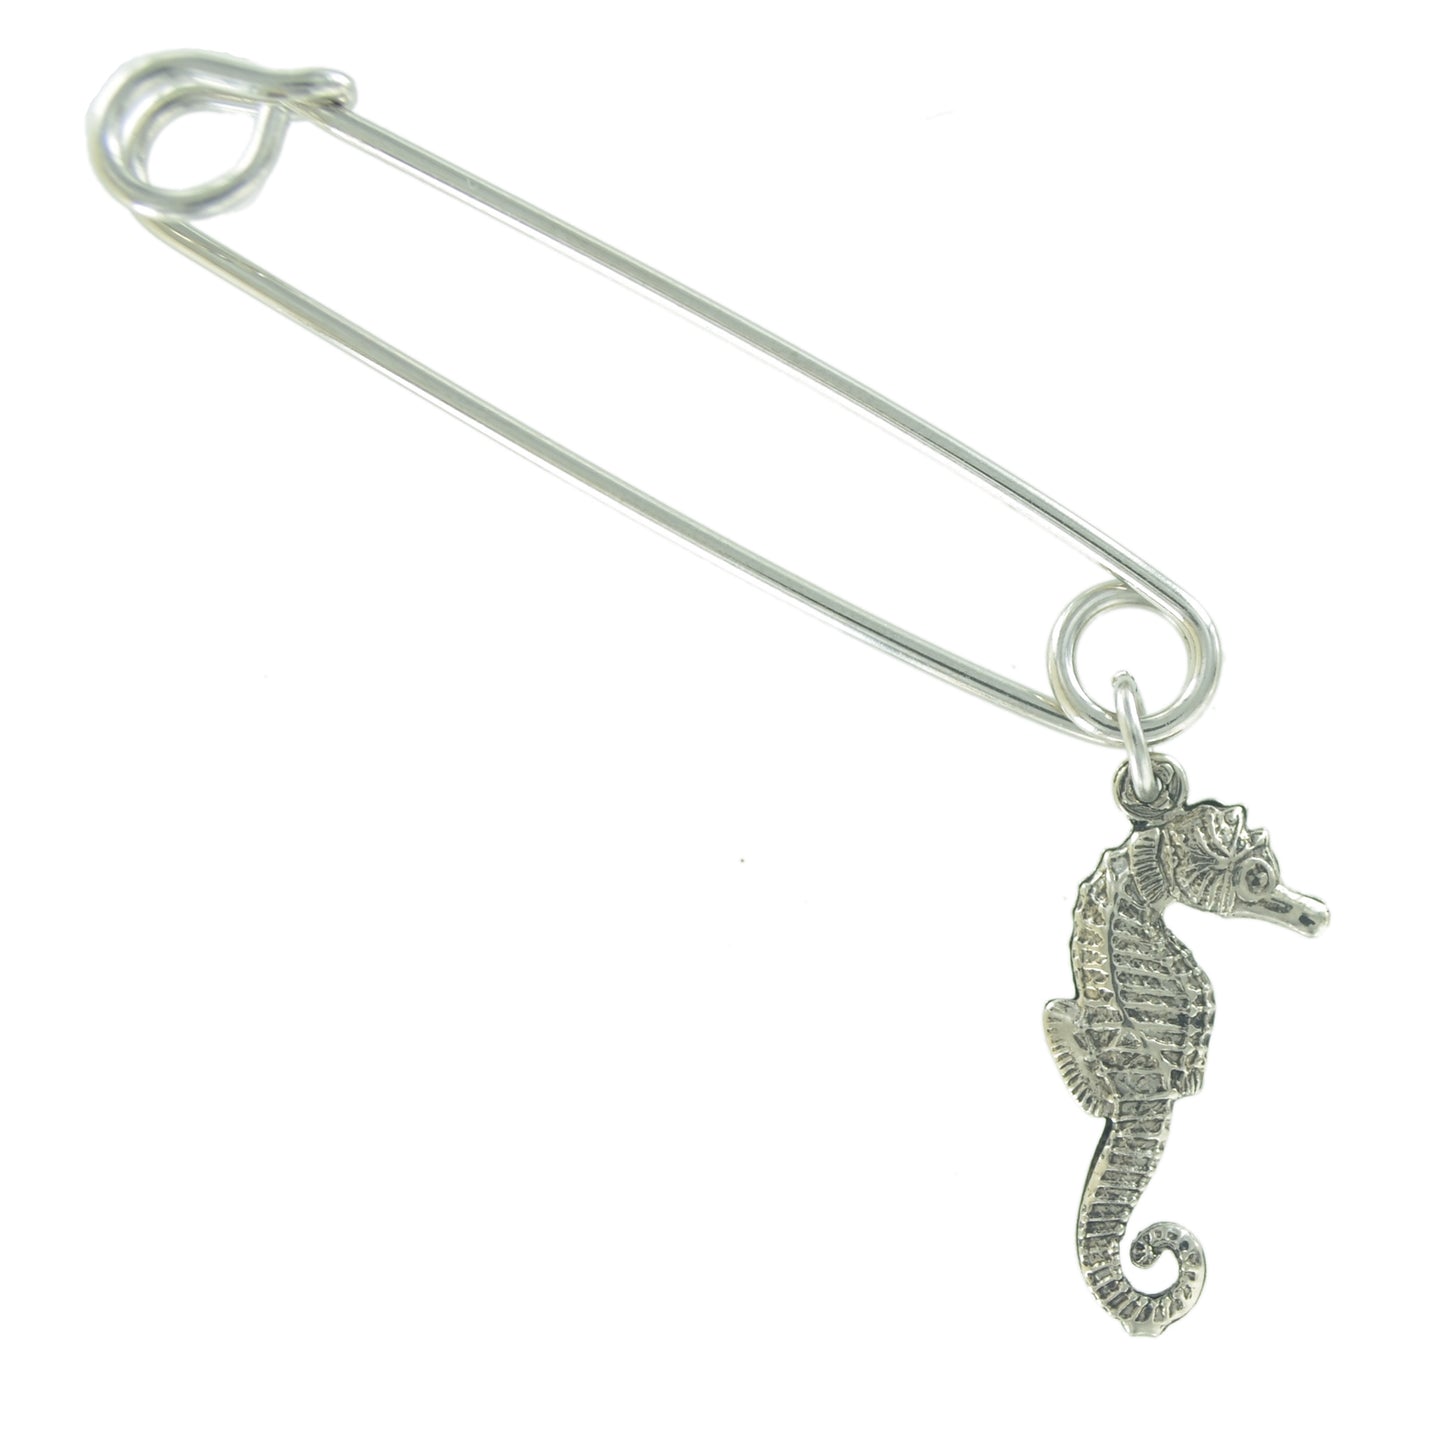 Made in USA Safety Pin Brooch Nautical Ocean Sea Horse Charm Silver Tone  2"